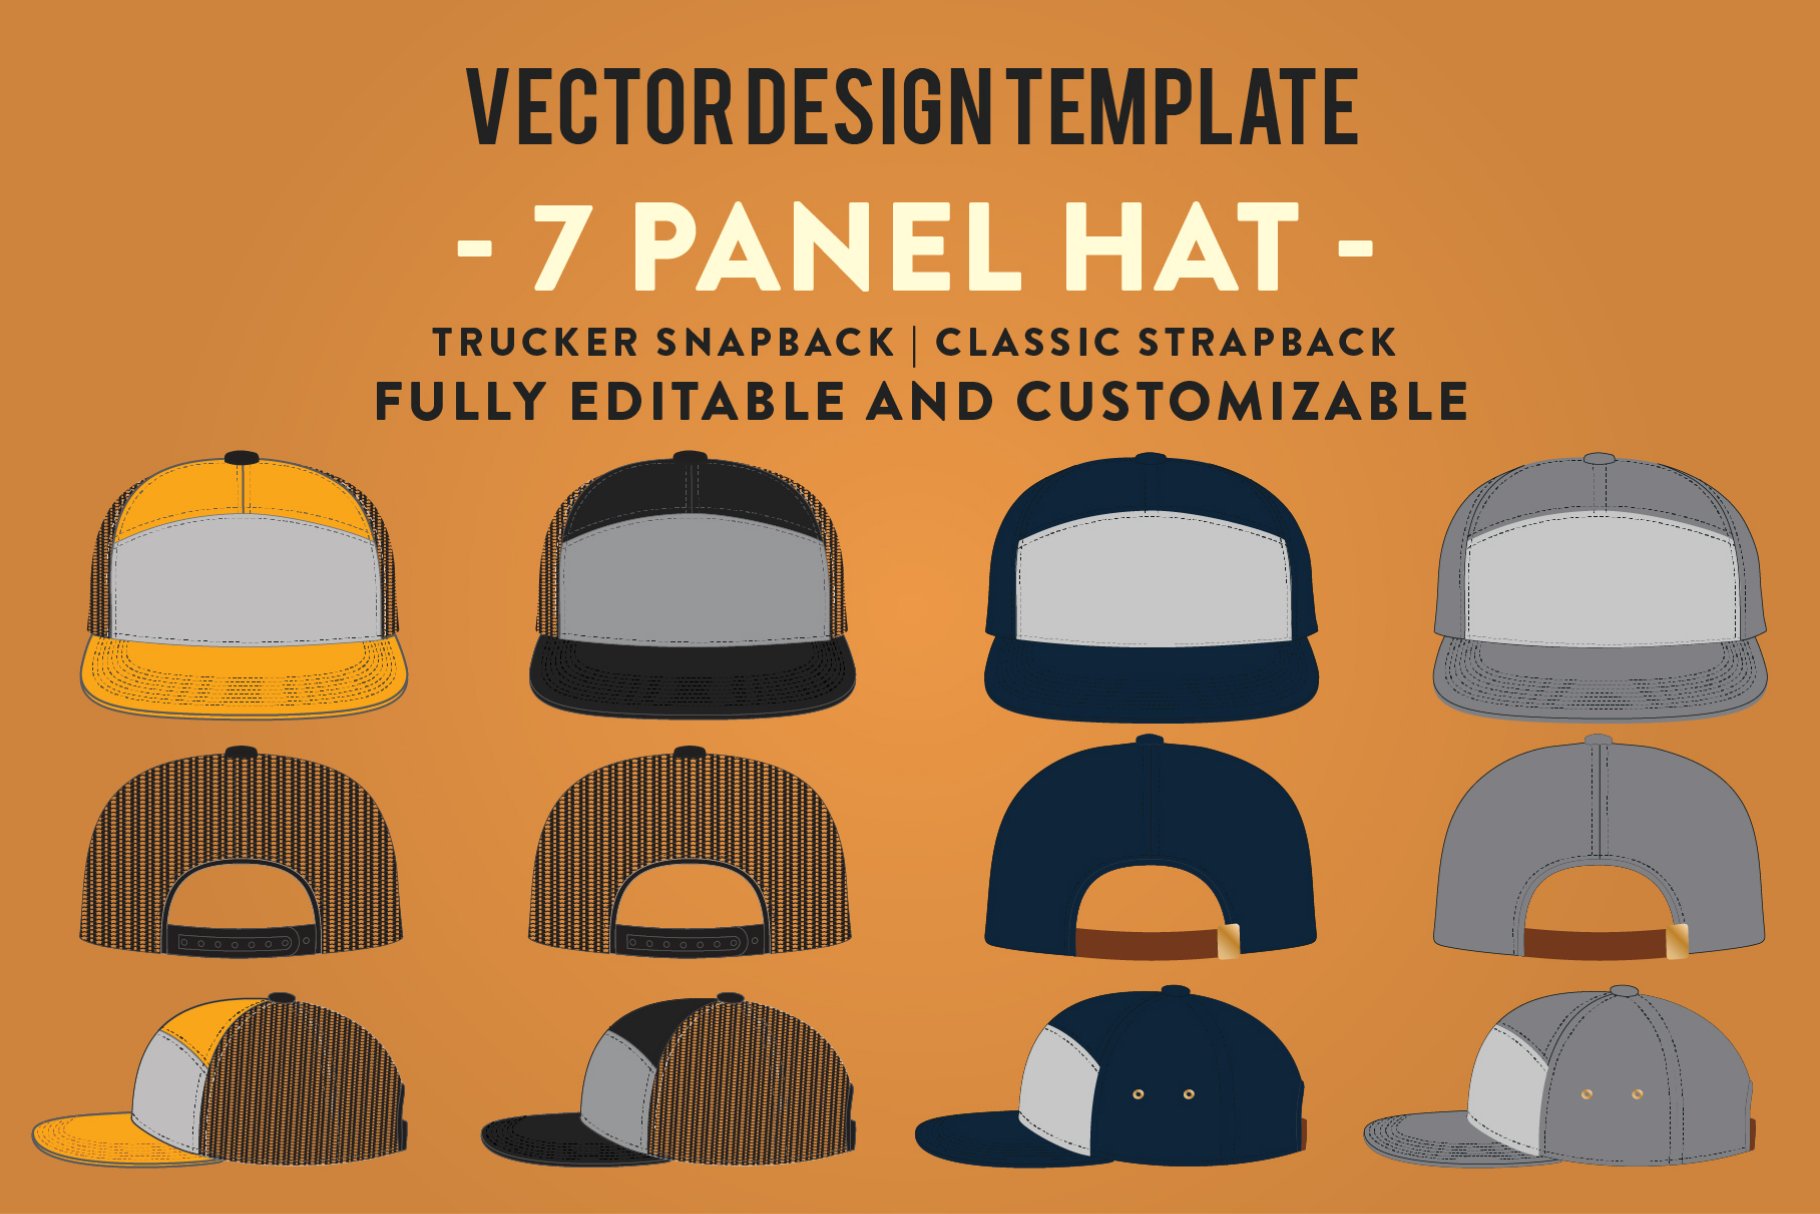 Hat Template - 7 Panel Hat cover image.